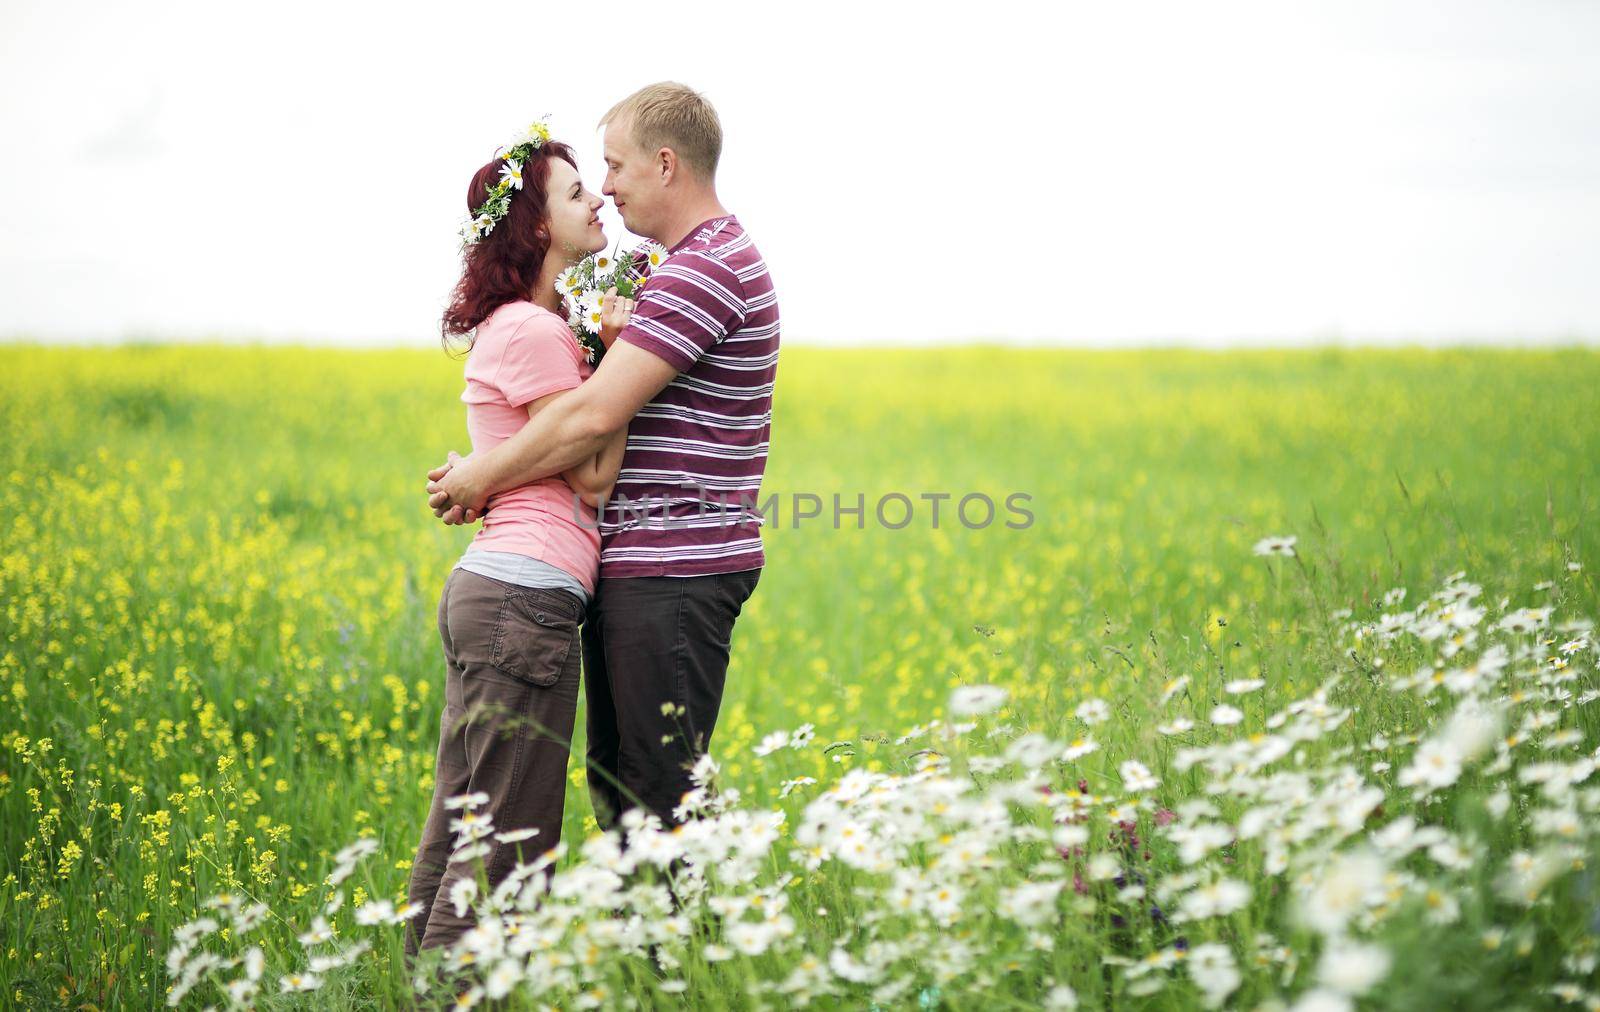 Enamored guy and girl in a green park with white daisies by selinsmo